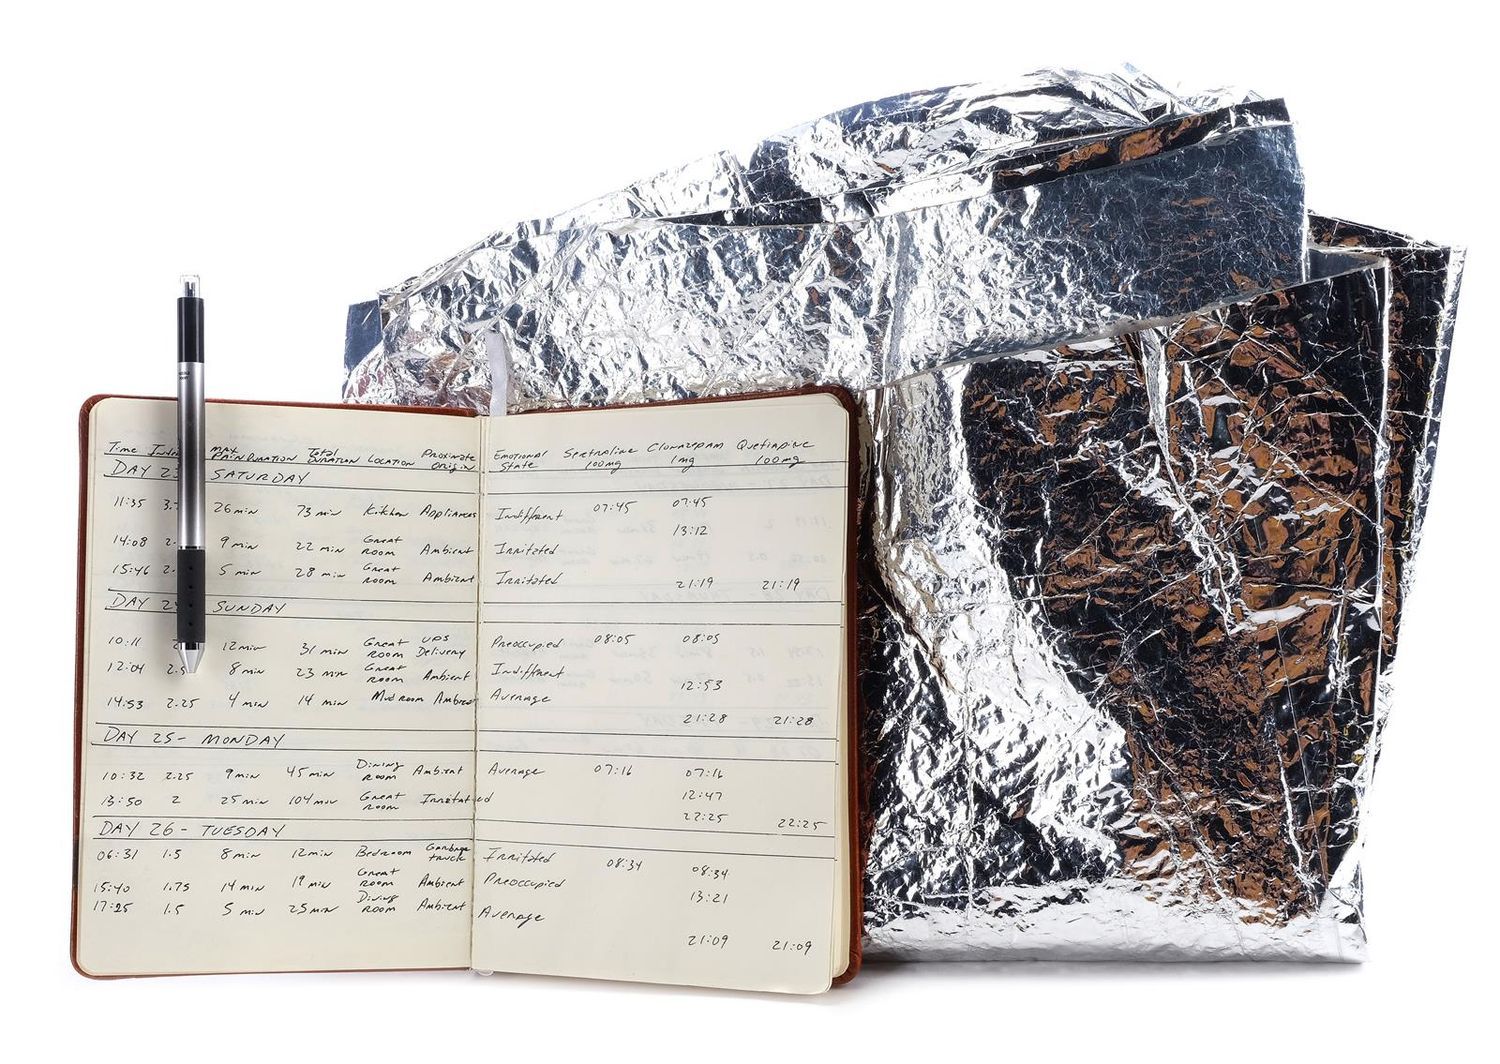 better call saul auction charles mcgill journal space blanket